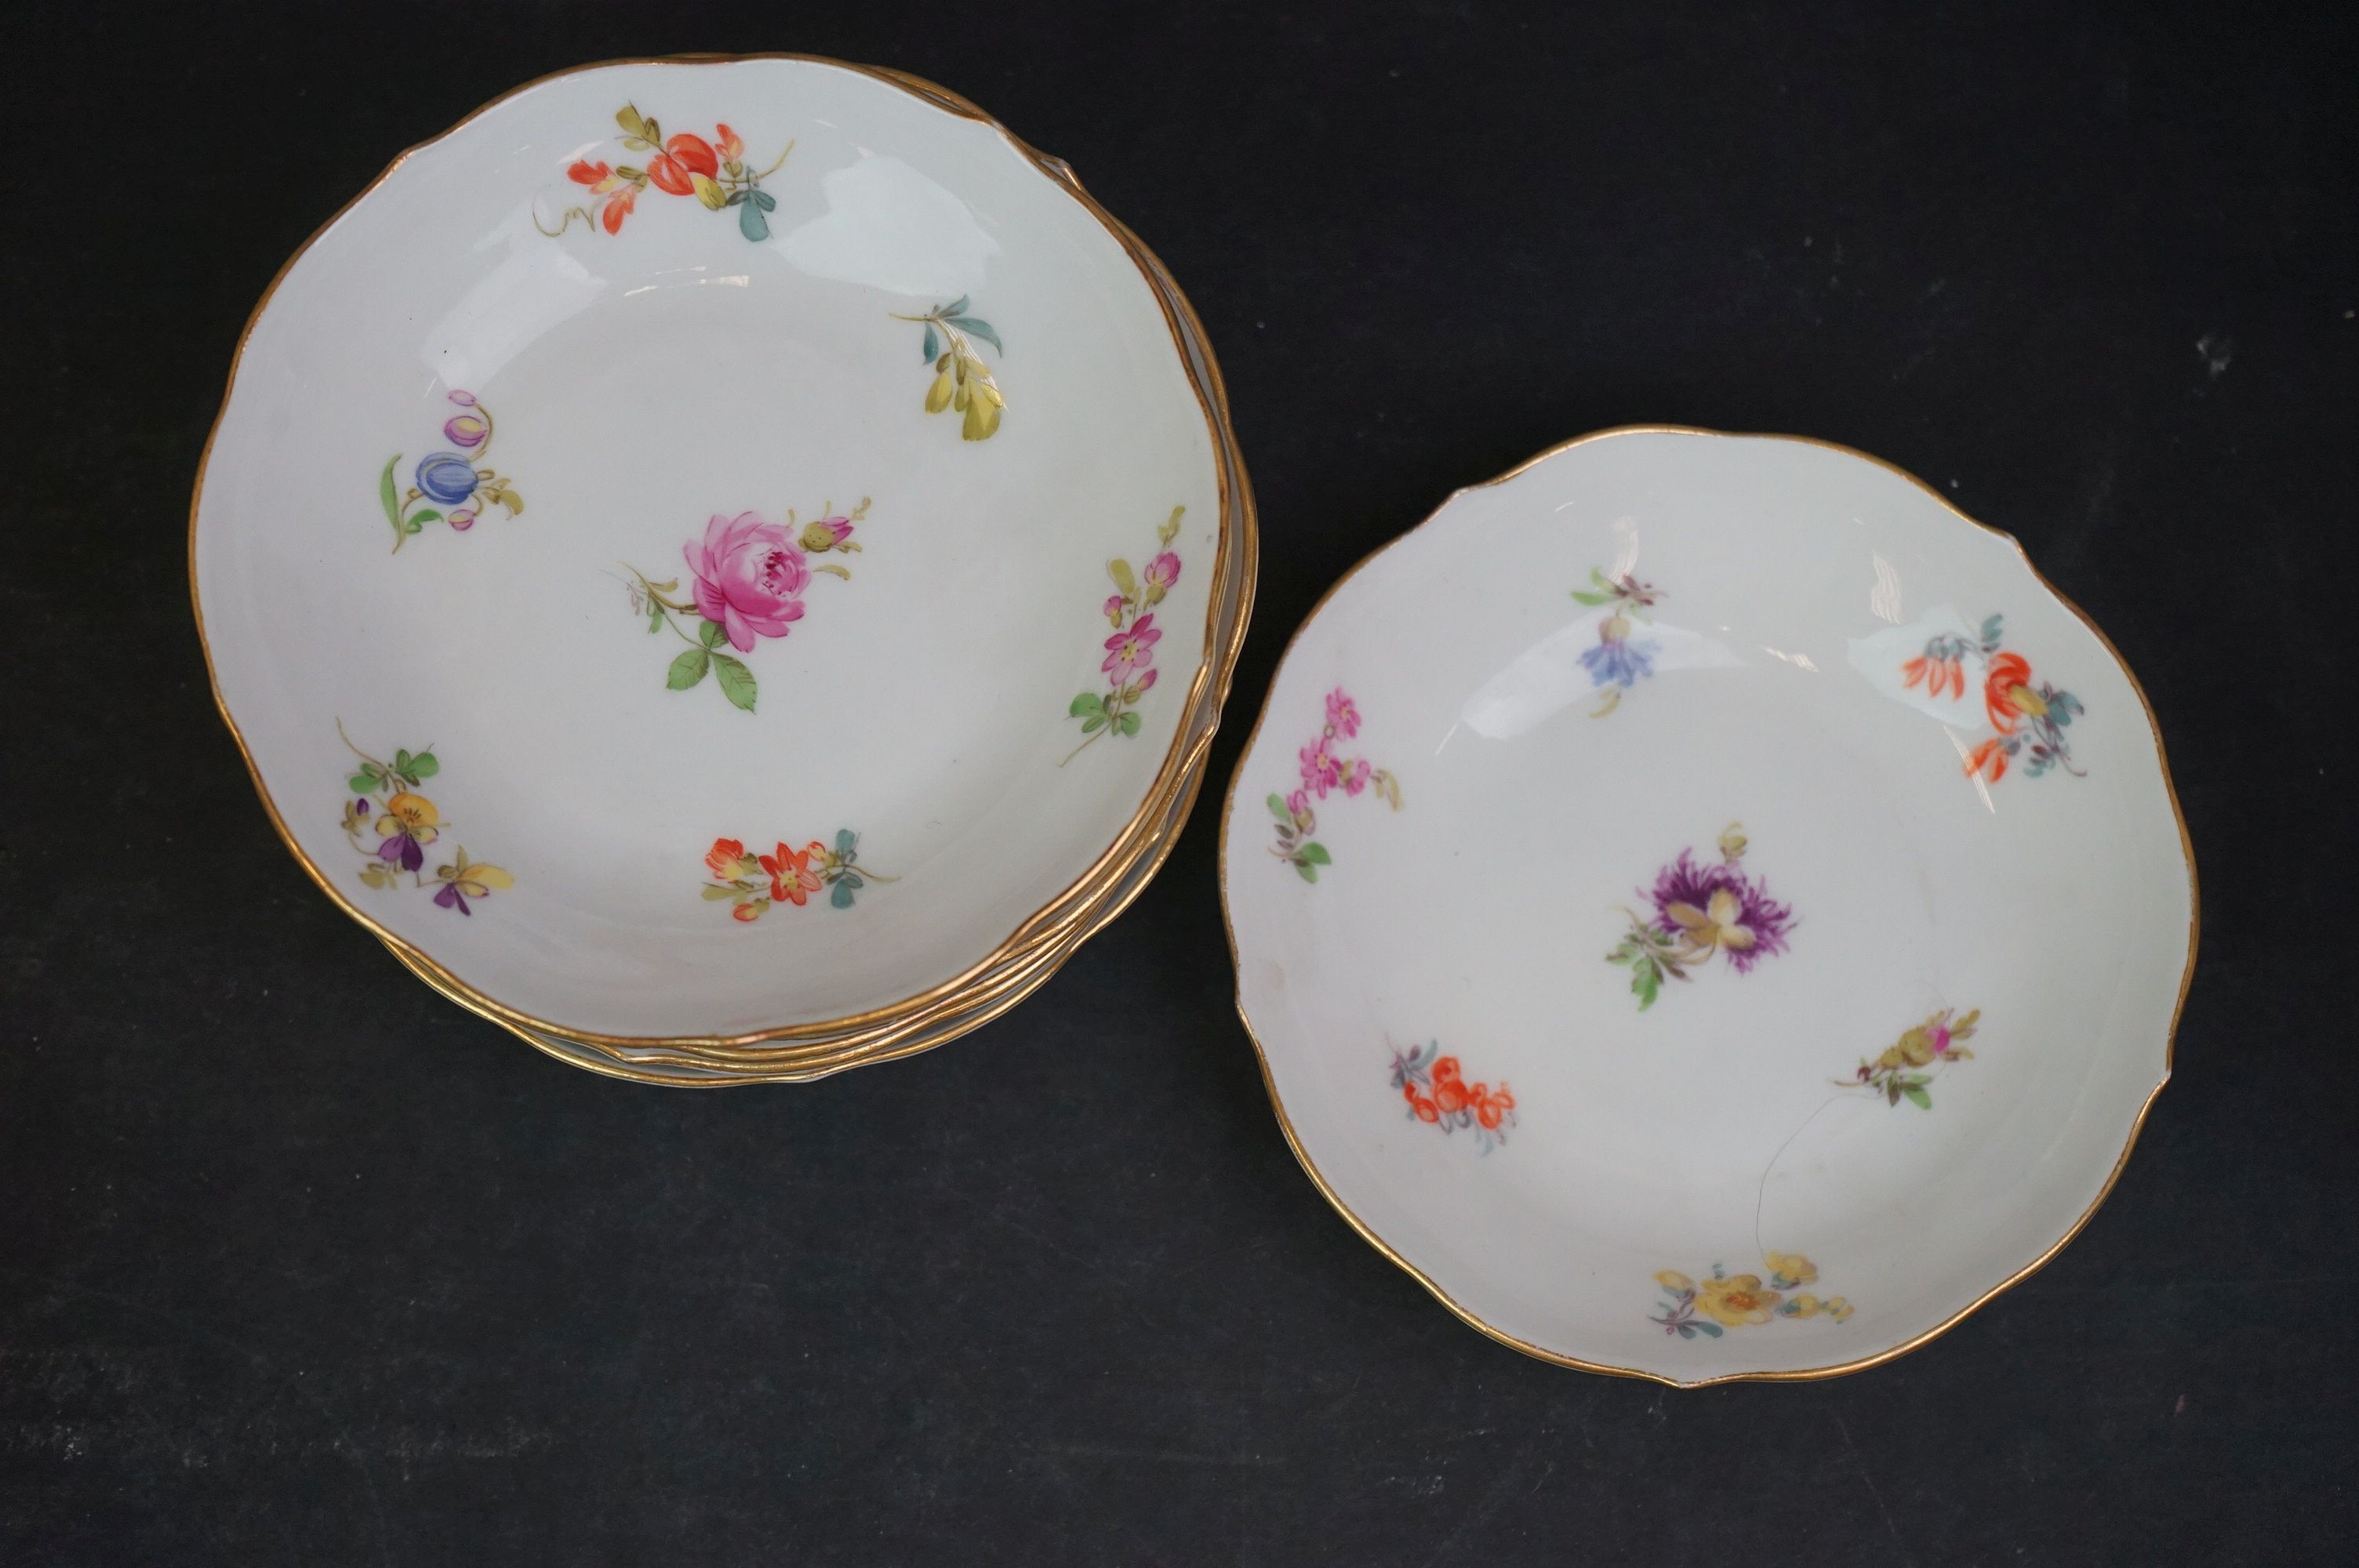 A collection of Meissen and Dresden porcelain to include plates, cups and dishes. - Image 11 of 13